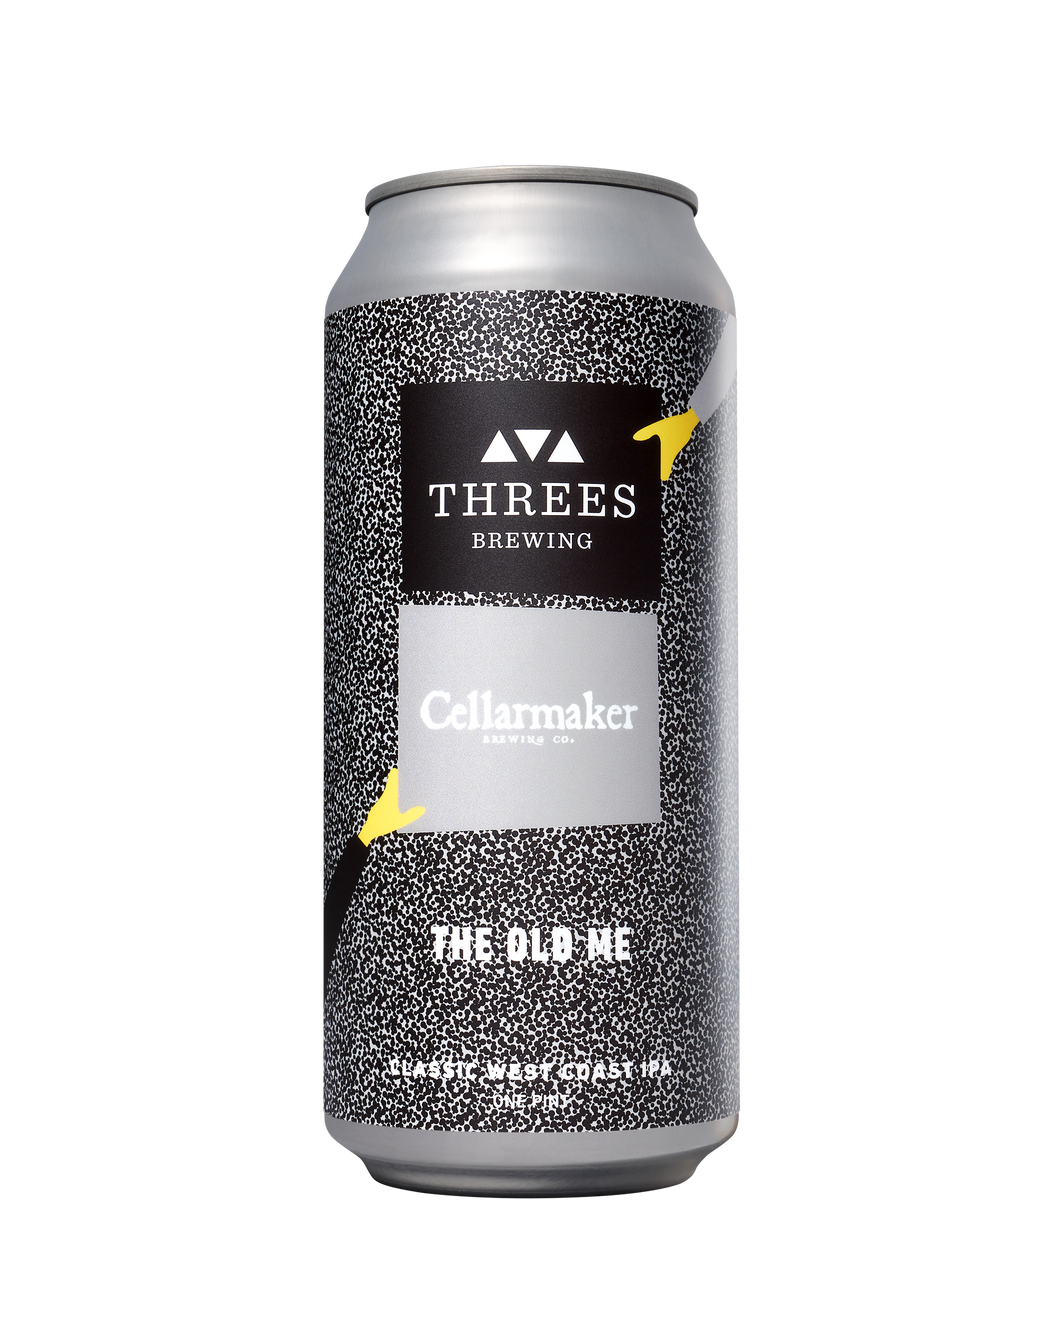 The Old Me (Collaboration with Cellarmaker Brewing - Classic West Coast IPA)